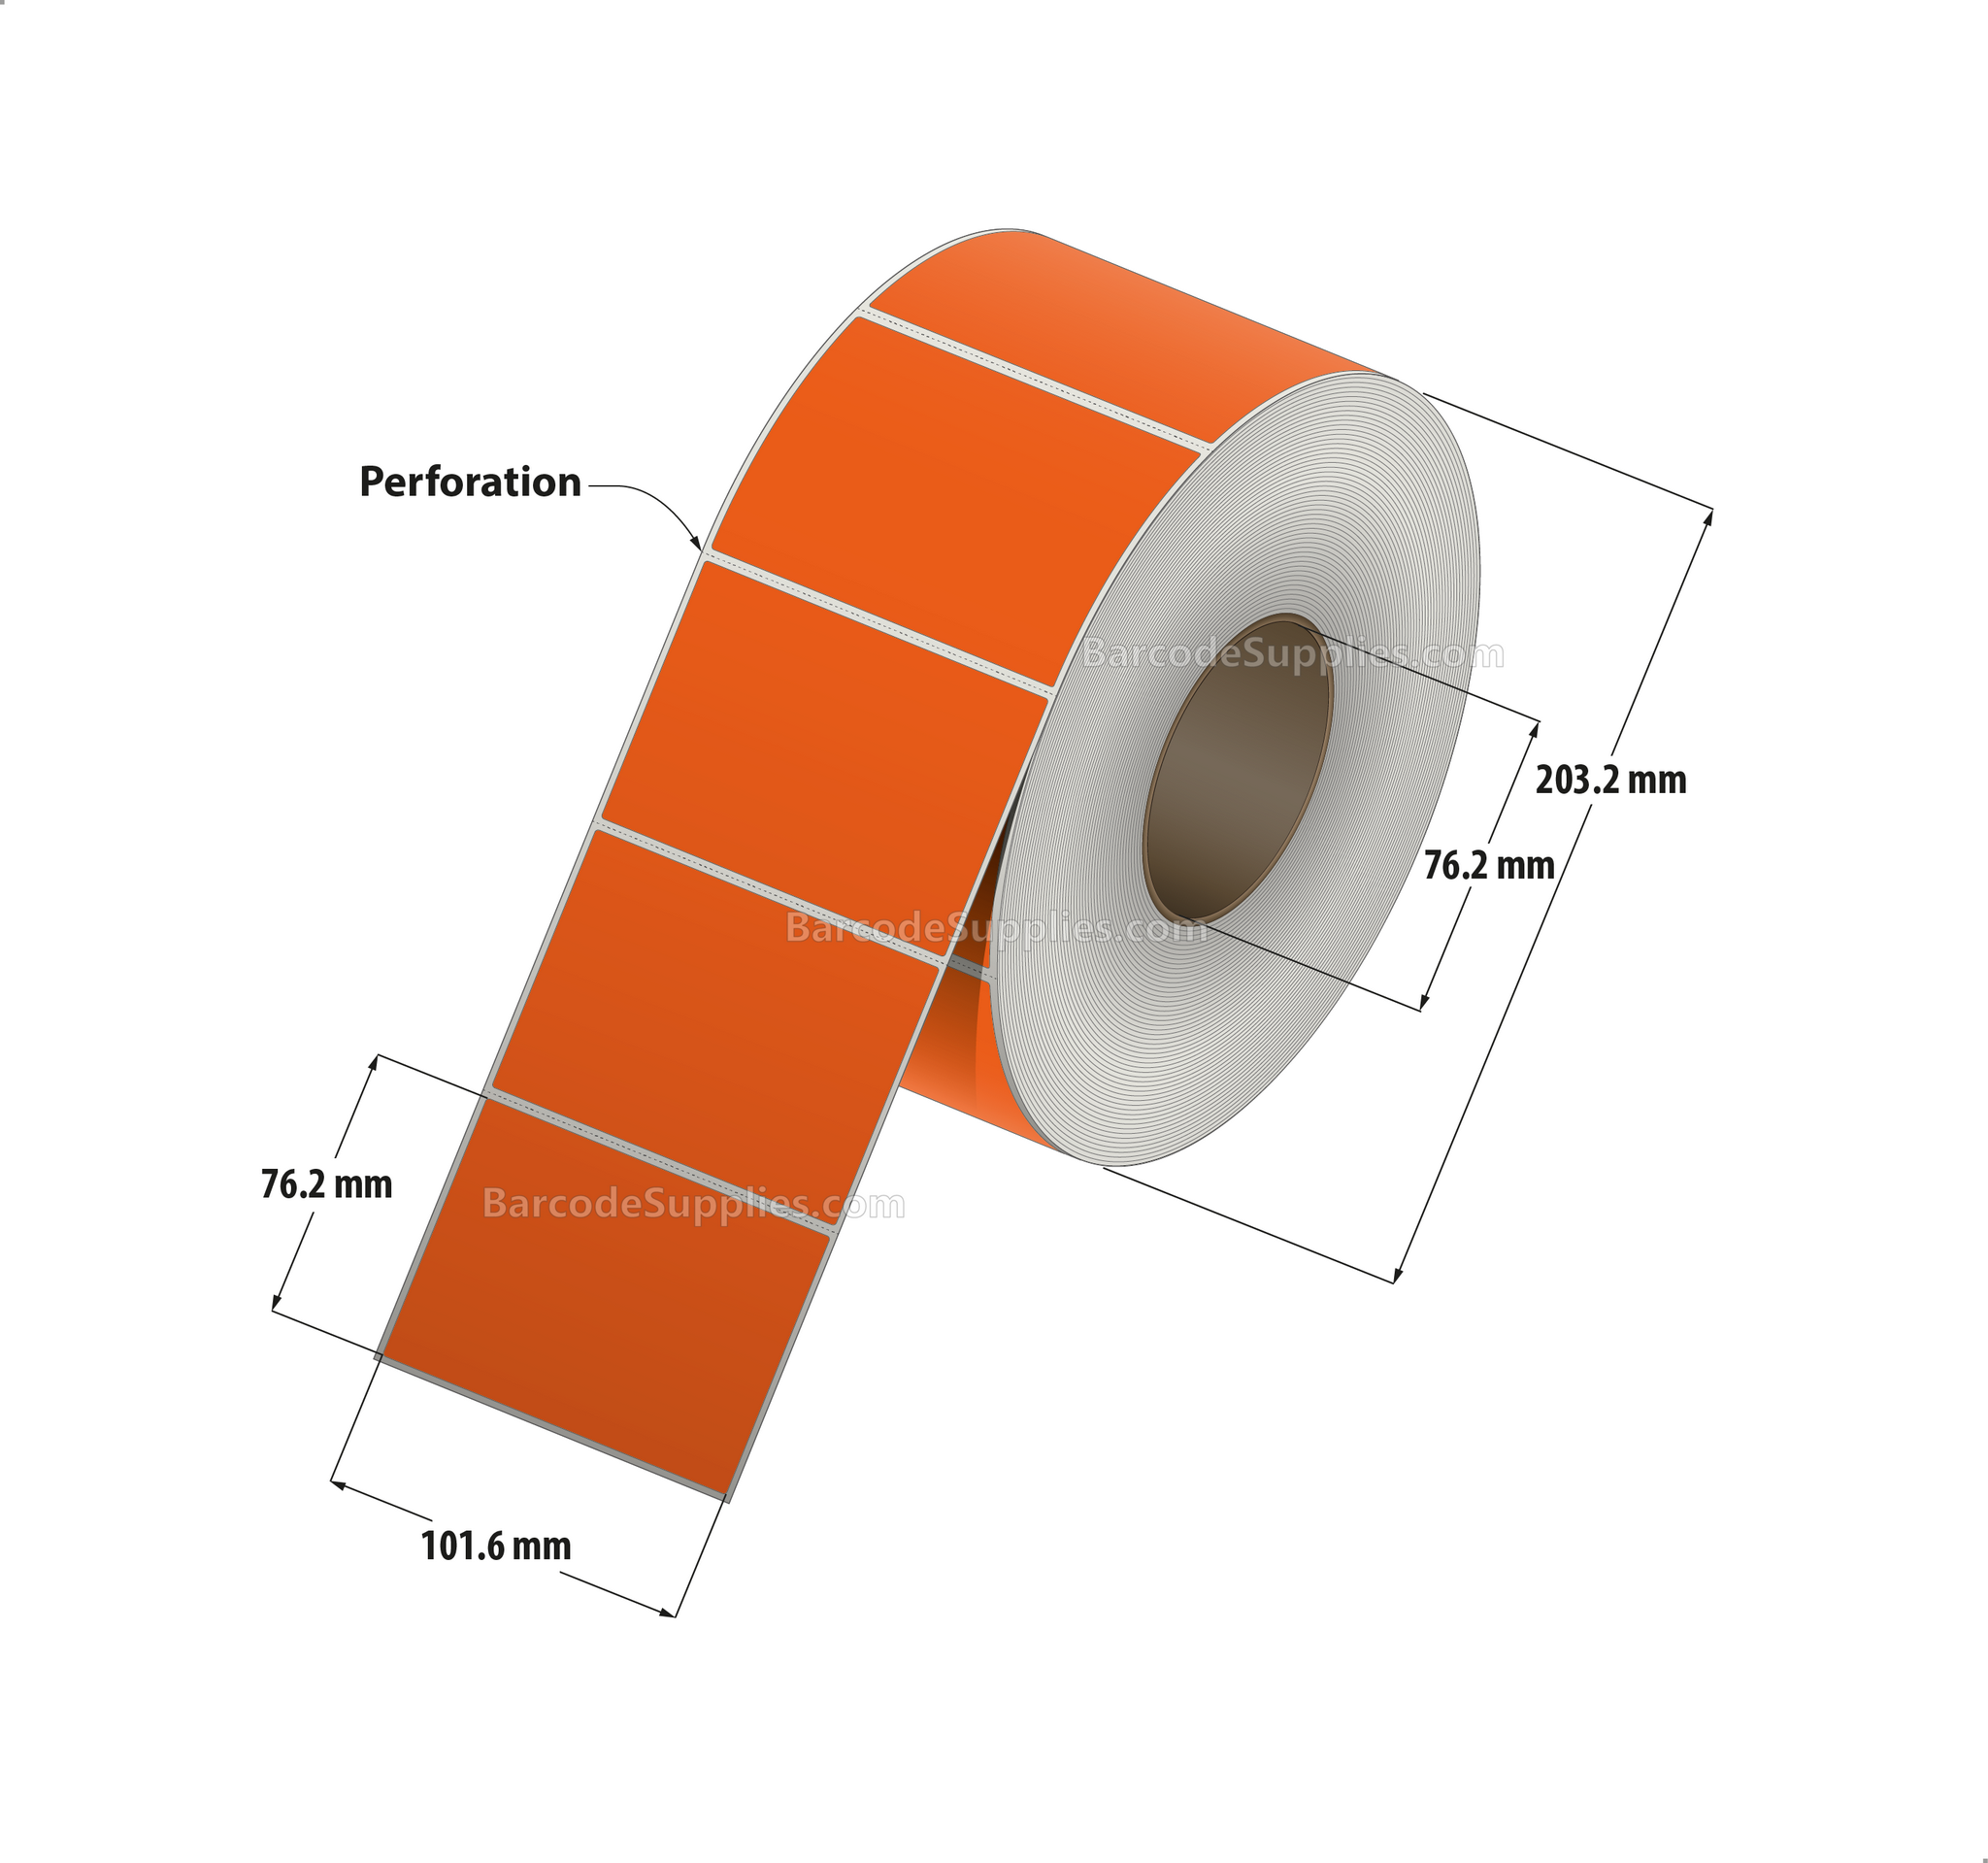 4 x 3 Thermal Transfer Fluorescent Orange Labels With Permanent Acrylic Adhesive - Perforated - 1900 Labels Per Roll - Carton Of 4 Rolls - 7600 Labels Total - MPN: TH43-1PFO